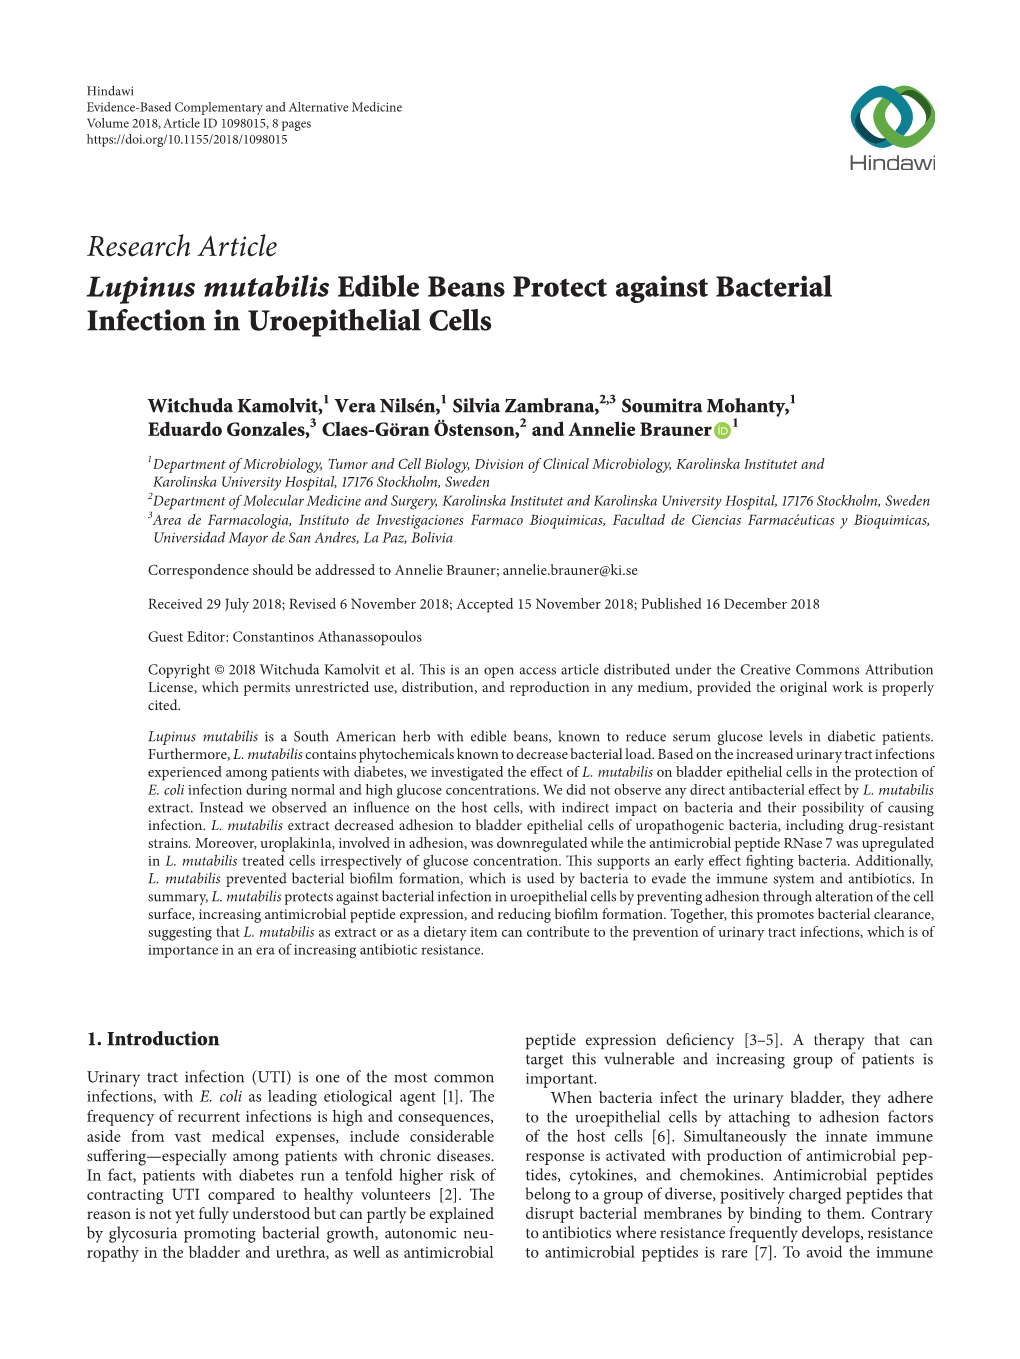 Lupinus Mutabilis Edible Beans Protect Against Bacterial Infection in Uroepithelial Cells